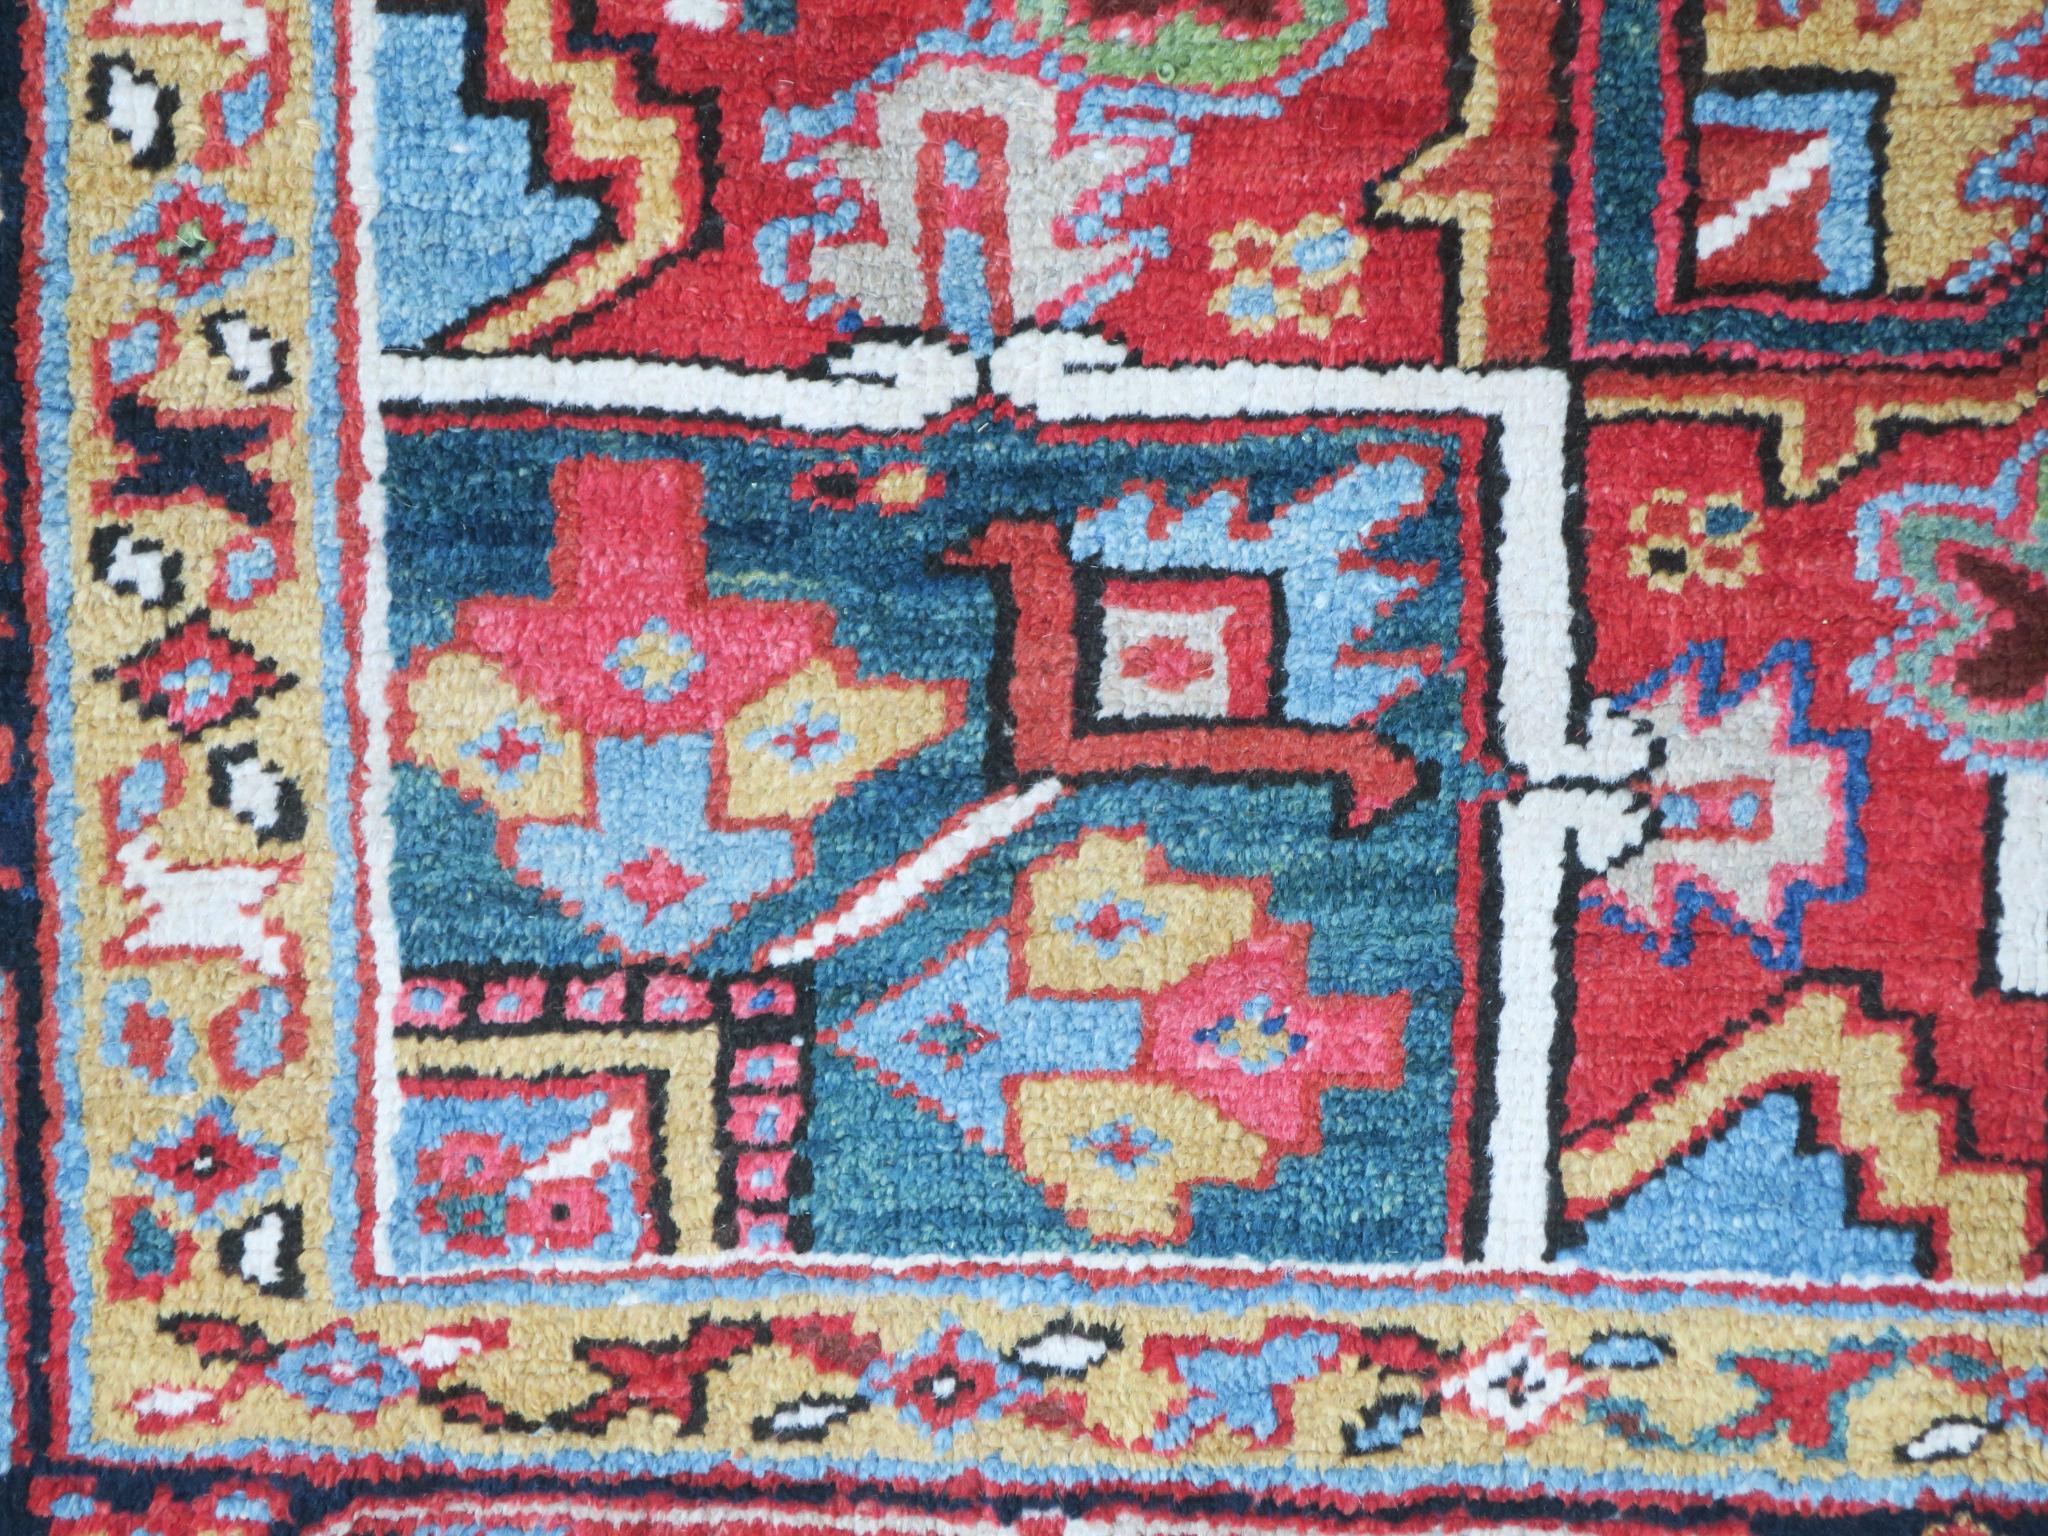 Antique Persian Heriz carpet dating from circa 1920 in very good condition, full pile with almost no signs of use, natural colors, angular design and attractive green corners, medallion with yellow lobes.